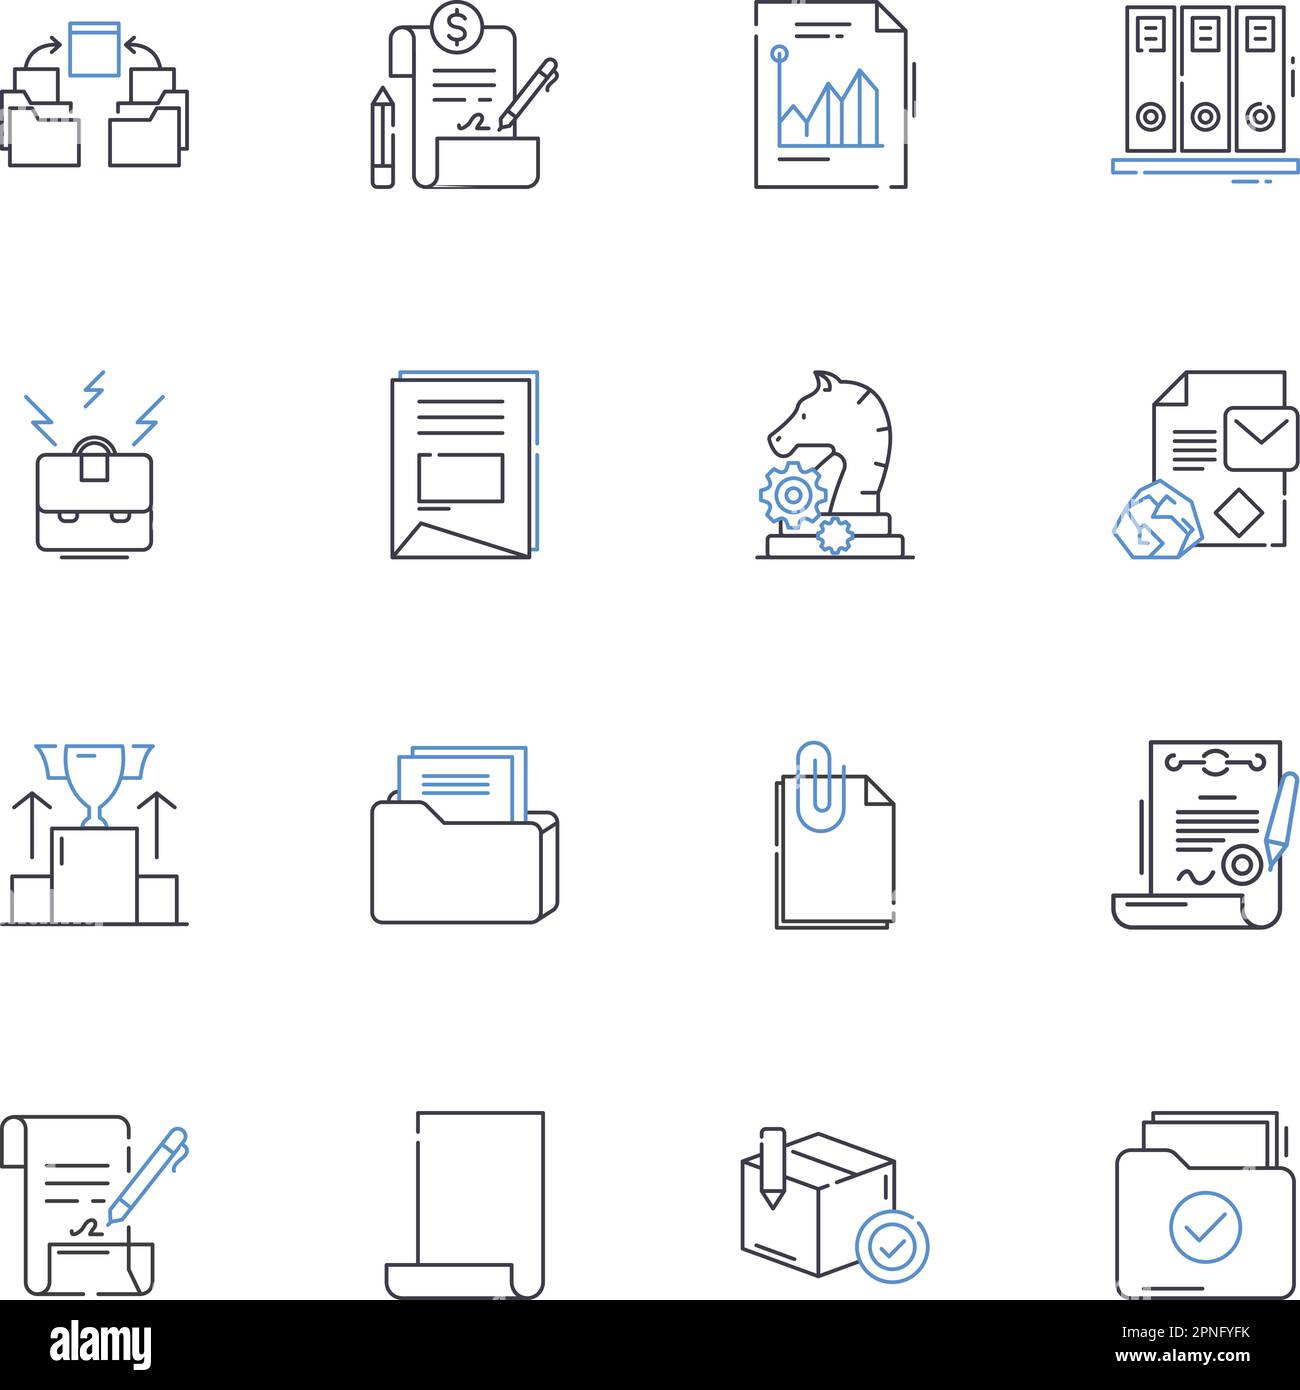 File type icons. Format and extension of documents. Set of pdf, doc, excel,  png, jpg, psd, gif, csv, xls, ppt, html, txt and others. Icons for download  on computer. Graphic templates for